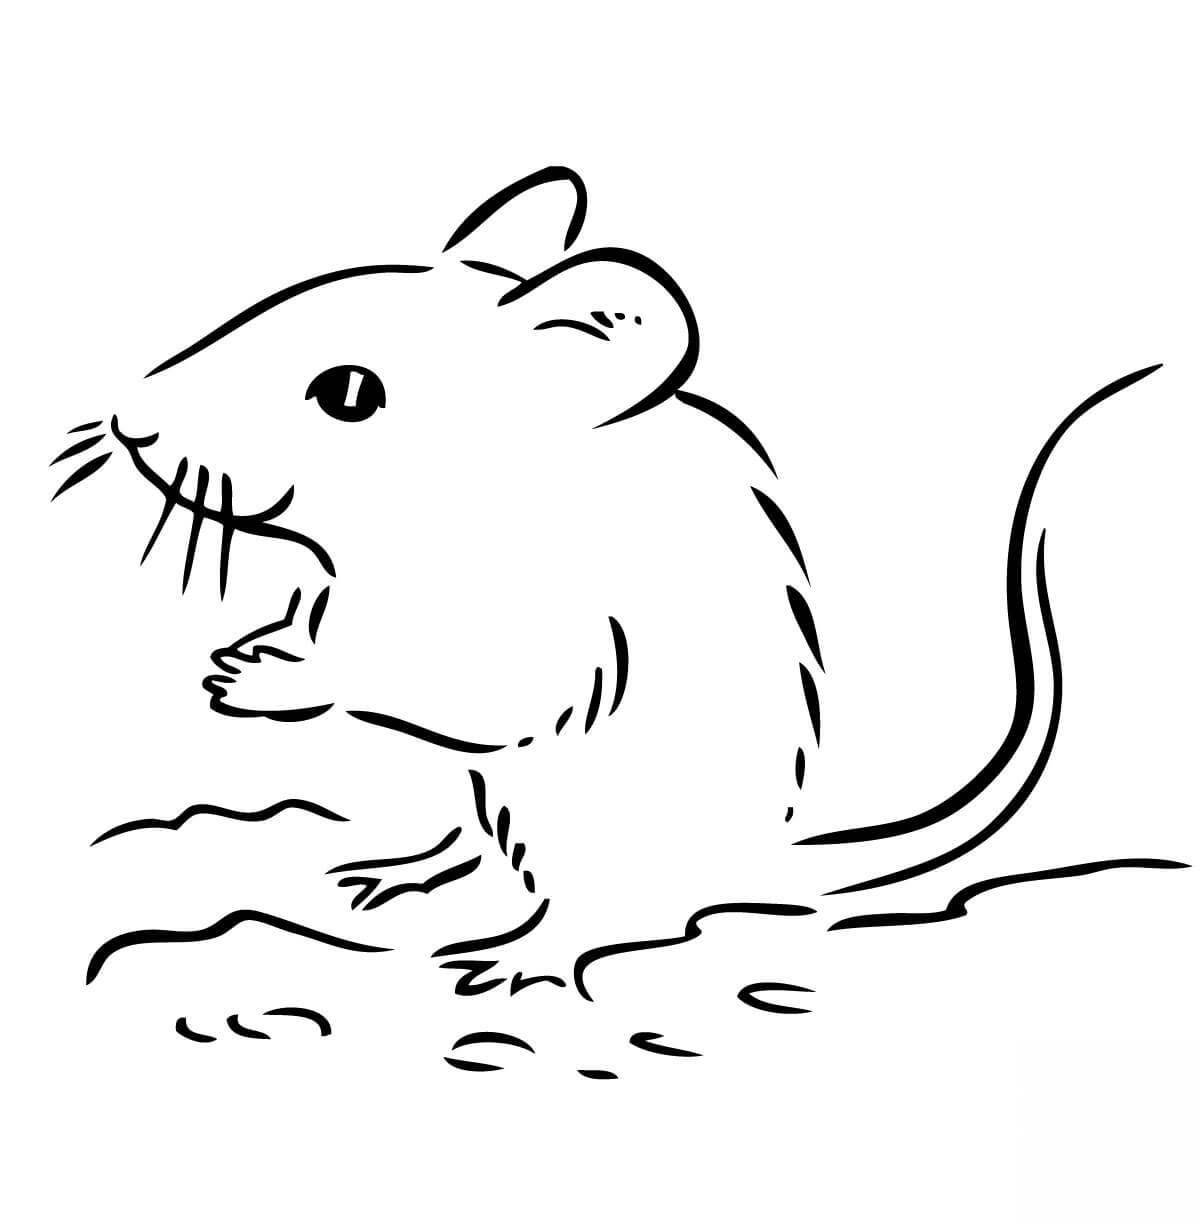 Fun coloring page harvest mouse